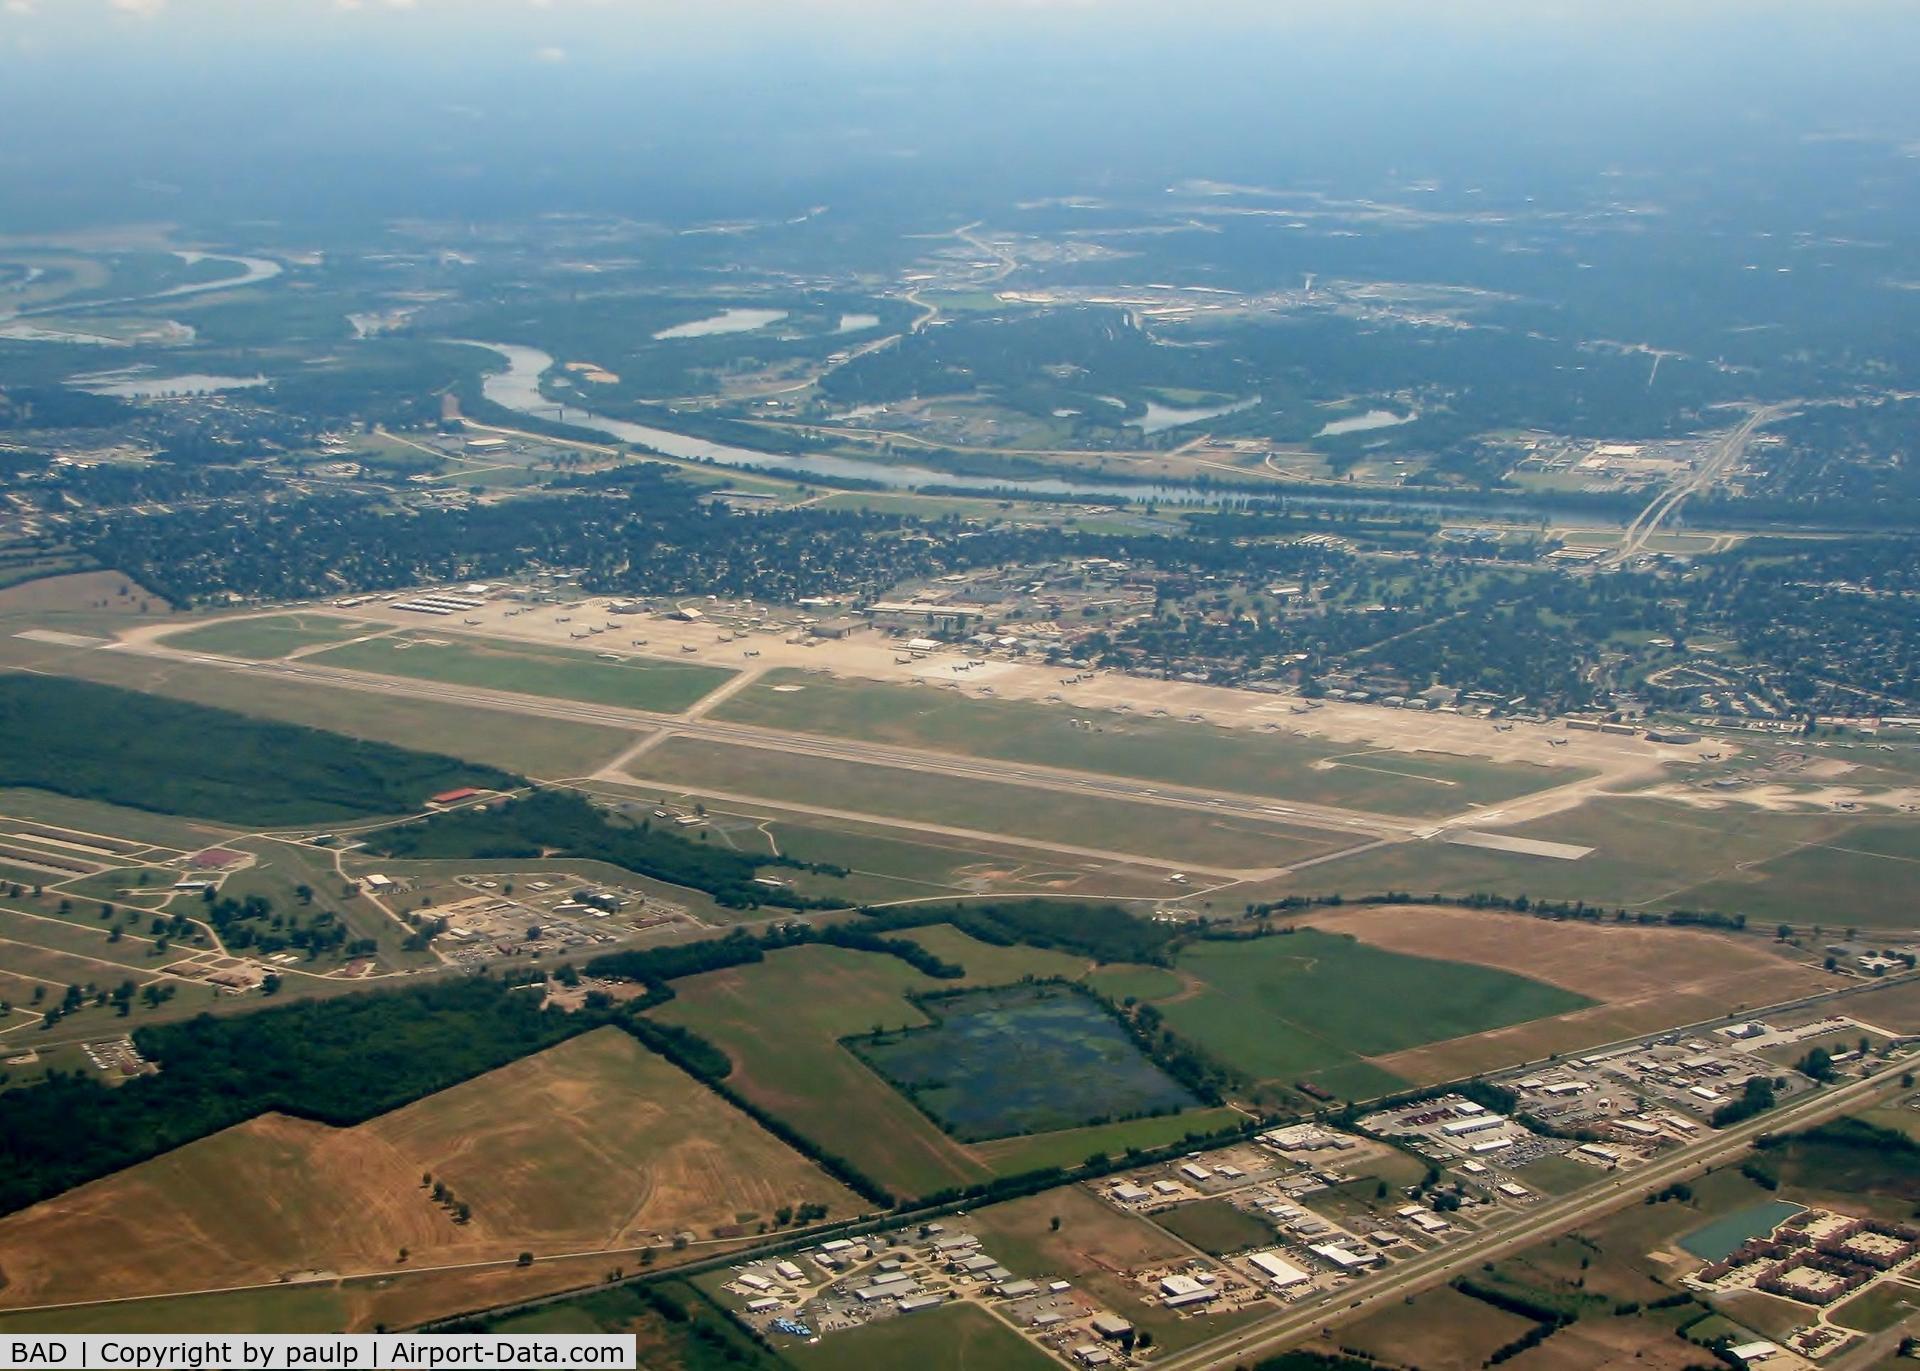 Barksdale Afb Airport (BAD) - Barksdale Air Force Base